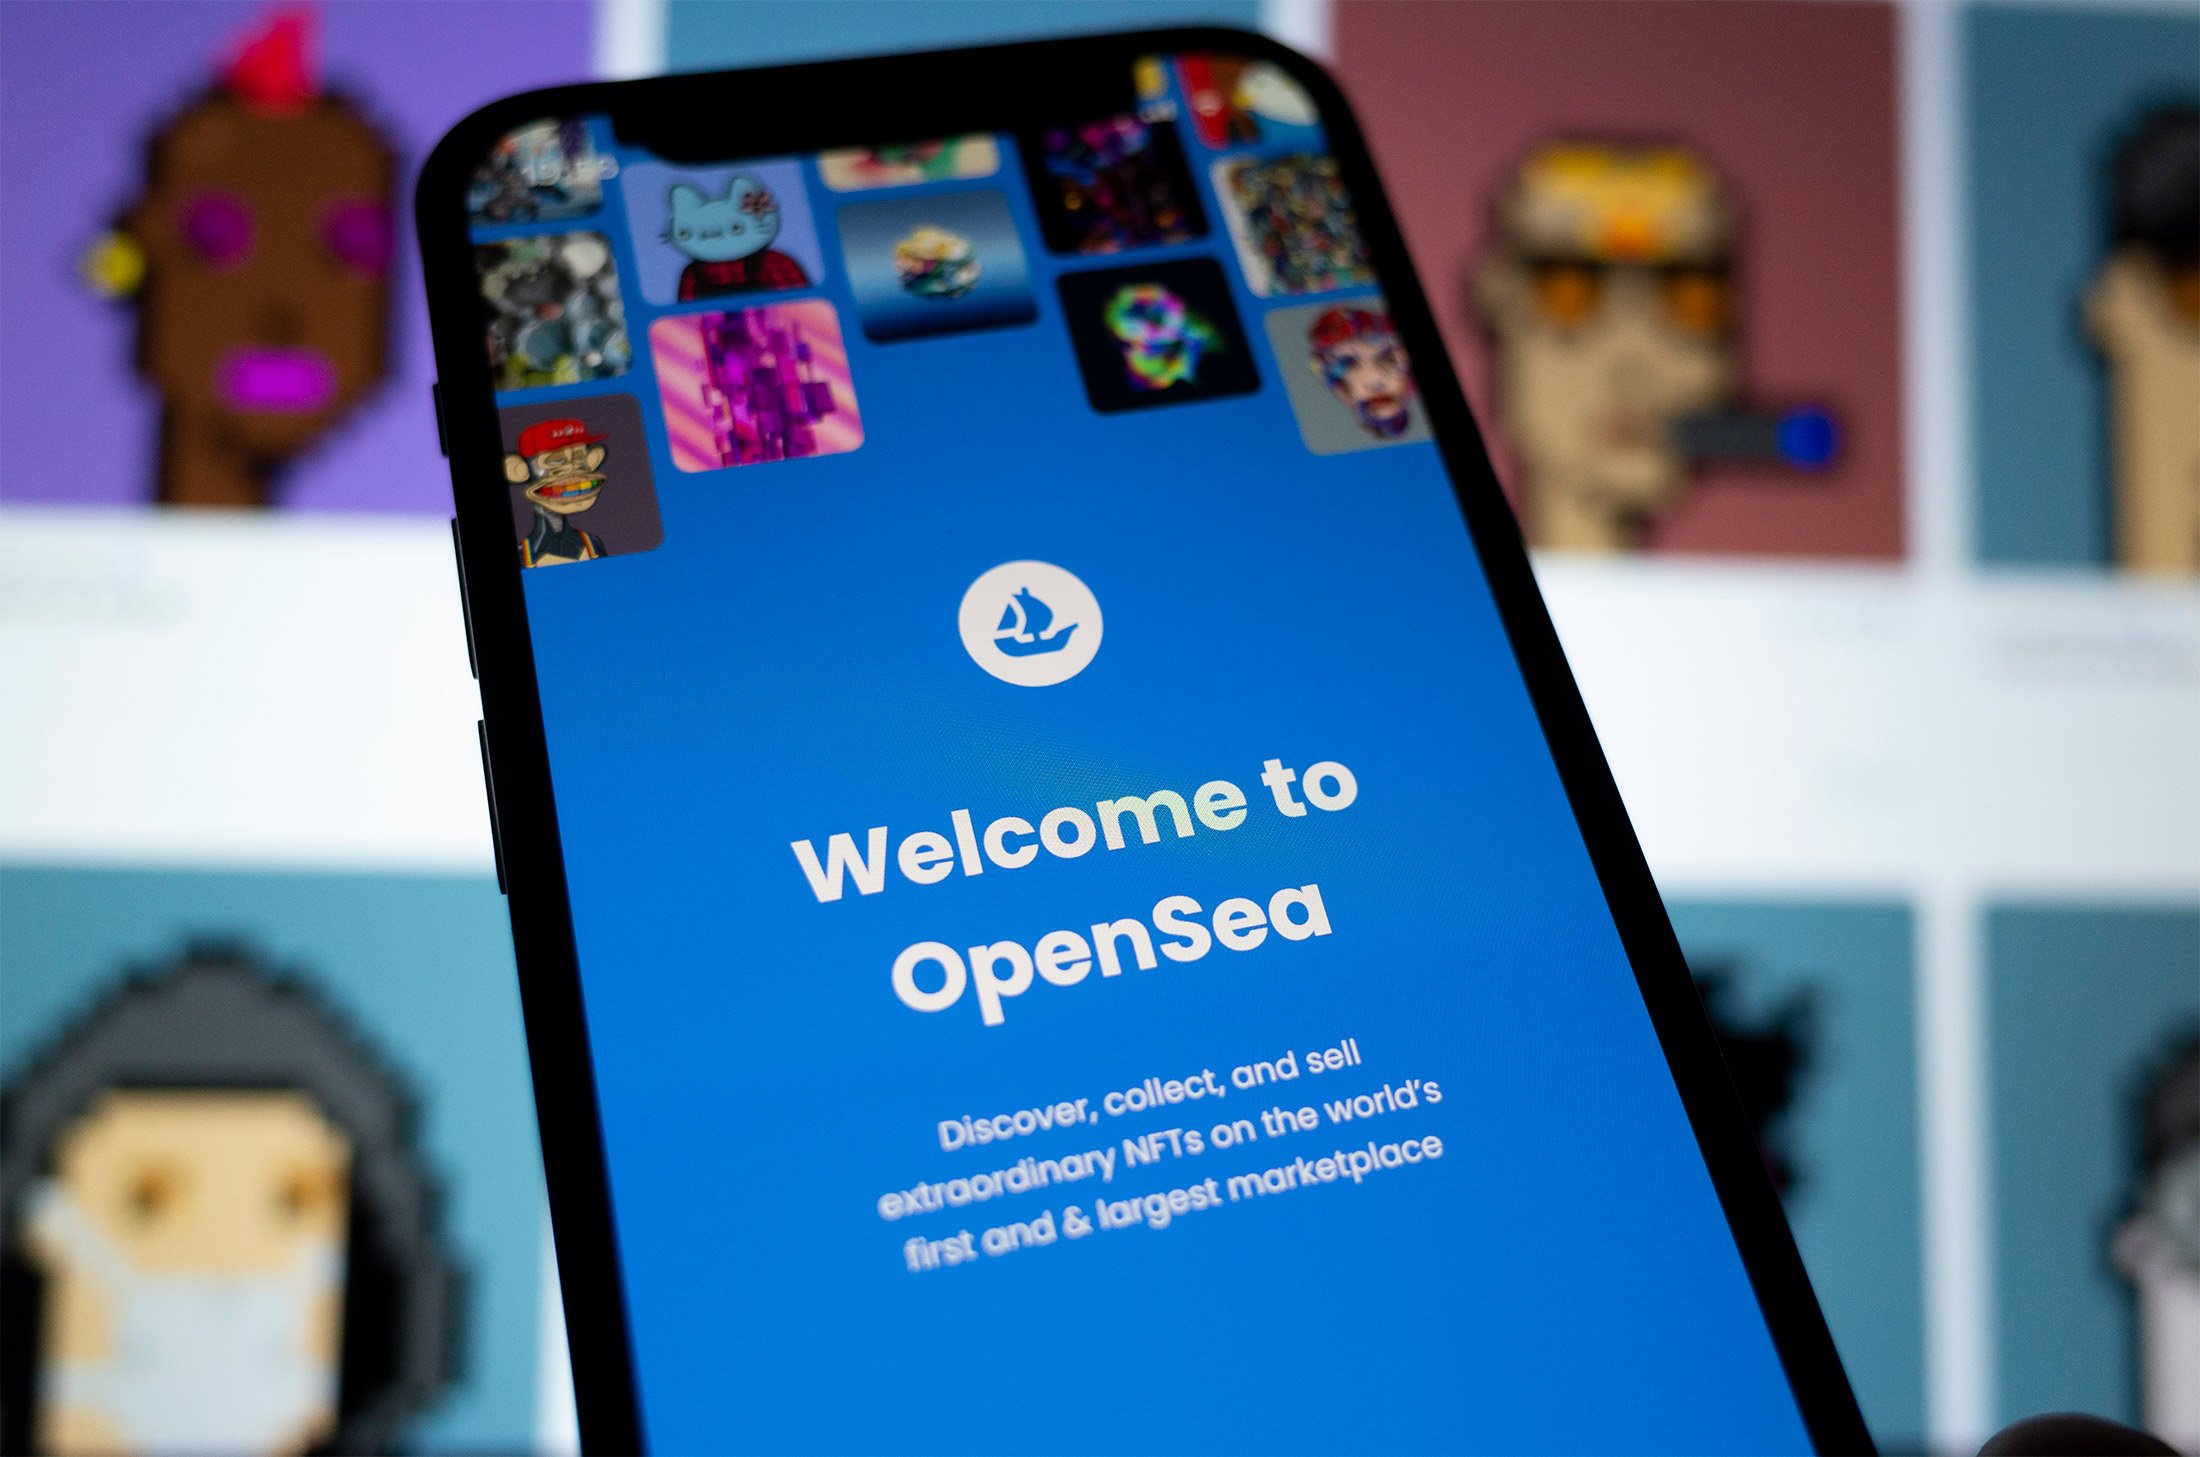 OpenSea images for mobile phone employees